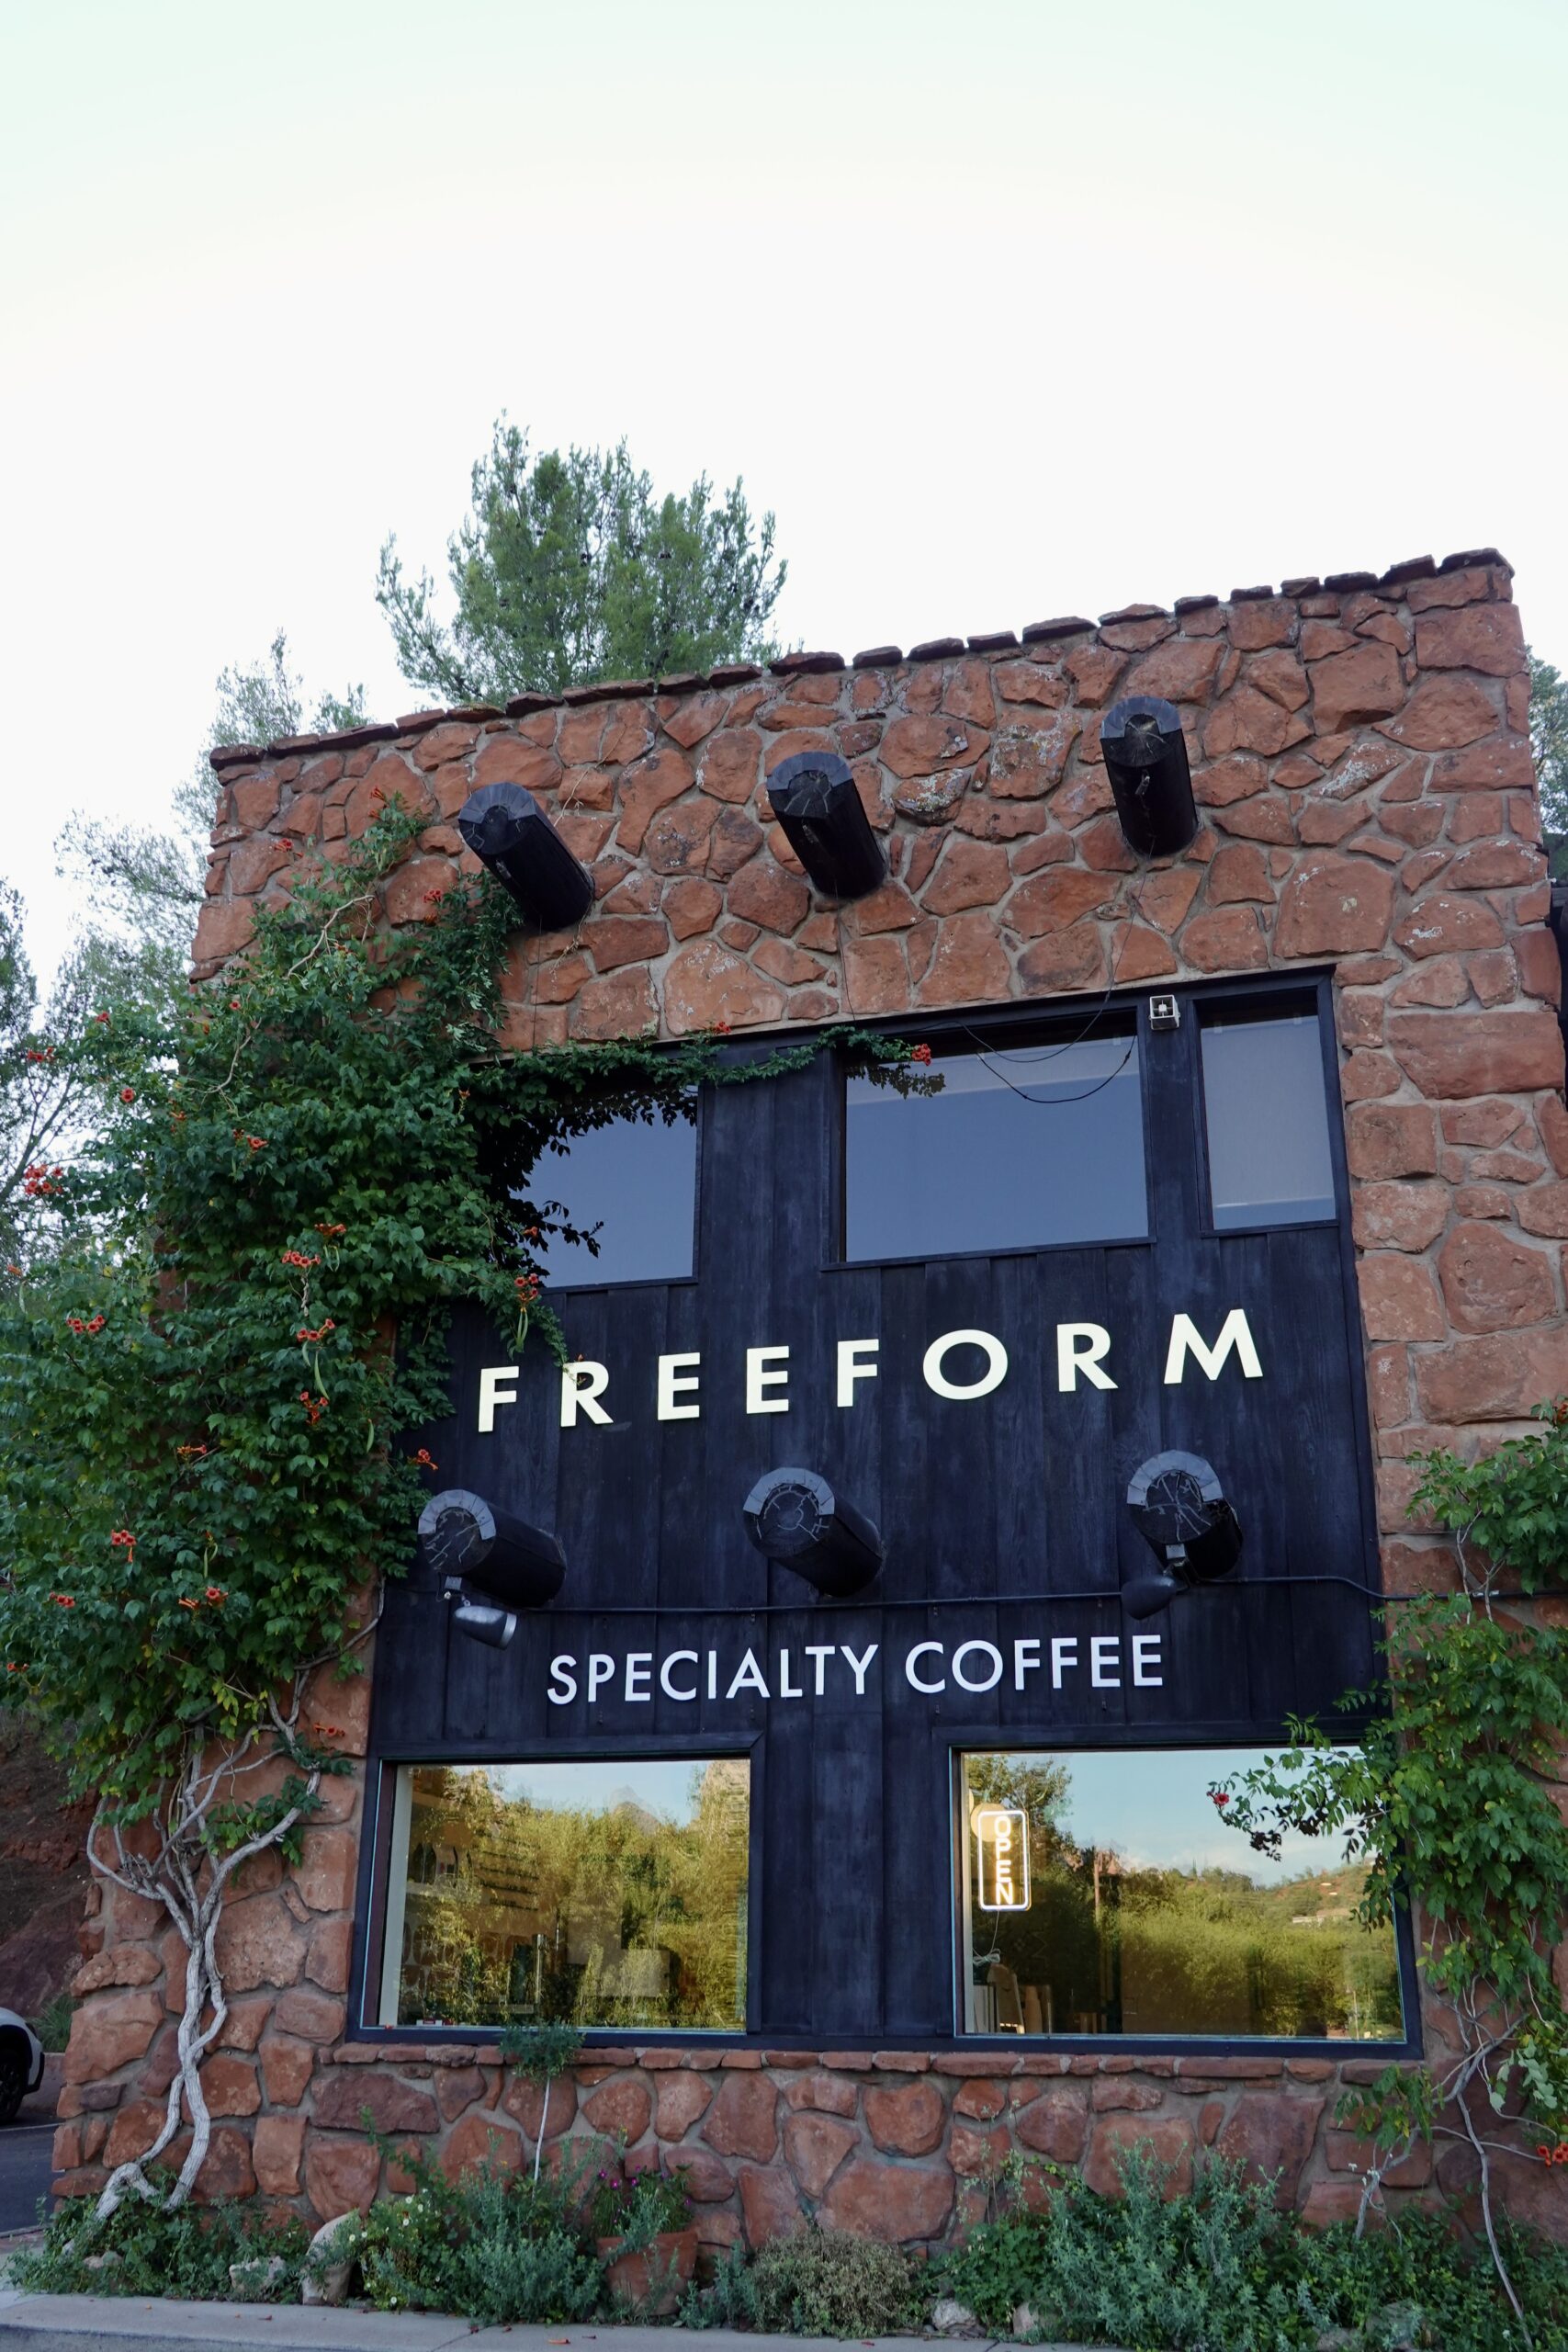 Best Coffee Shops in Sedona to Fuel Your Day!